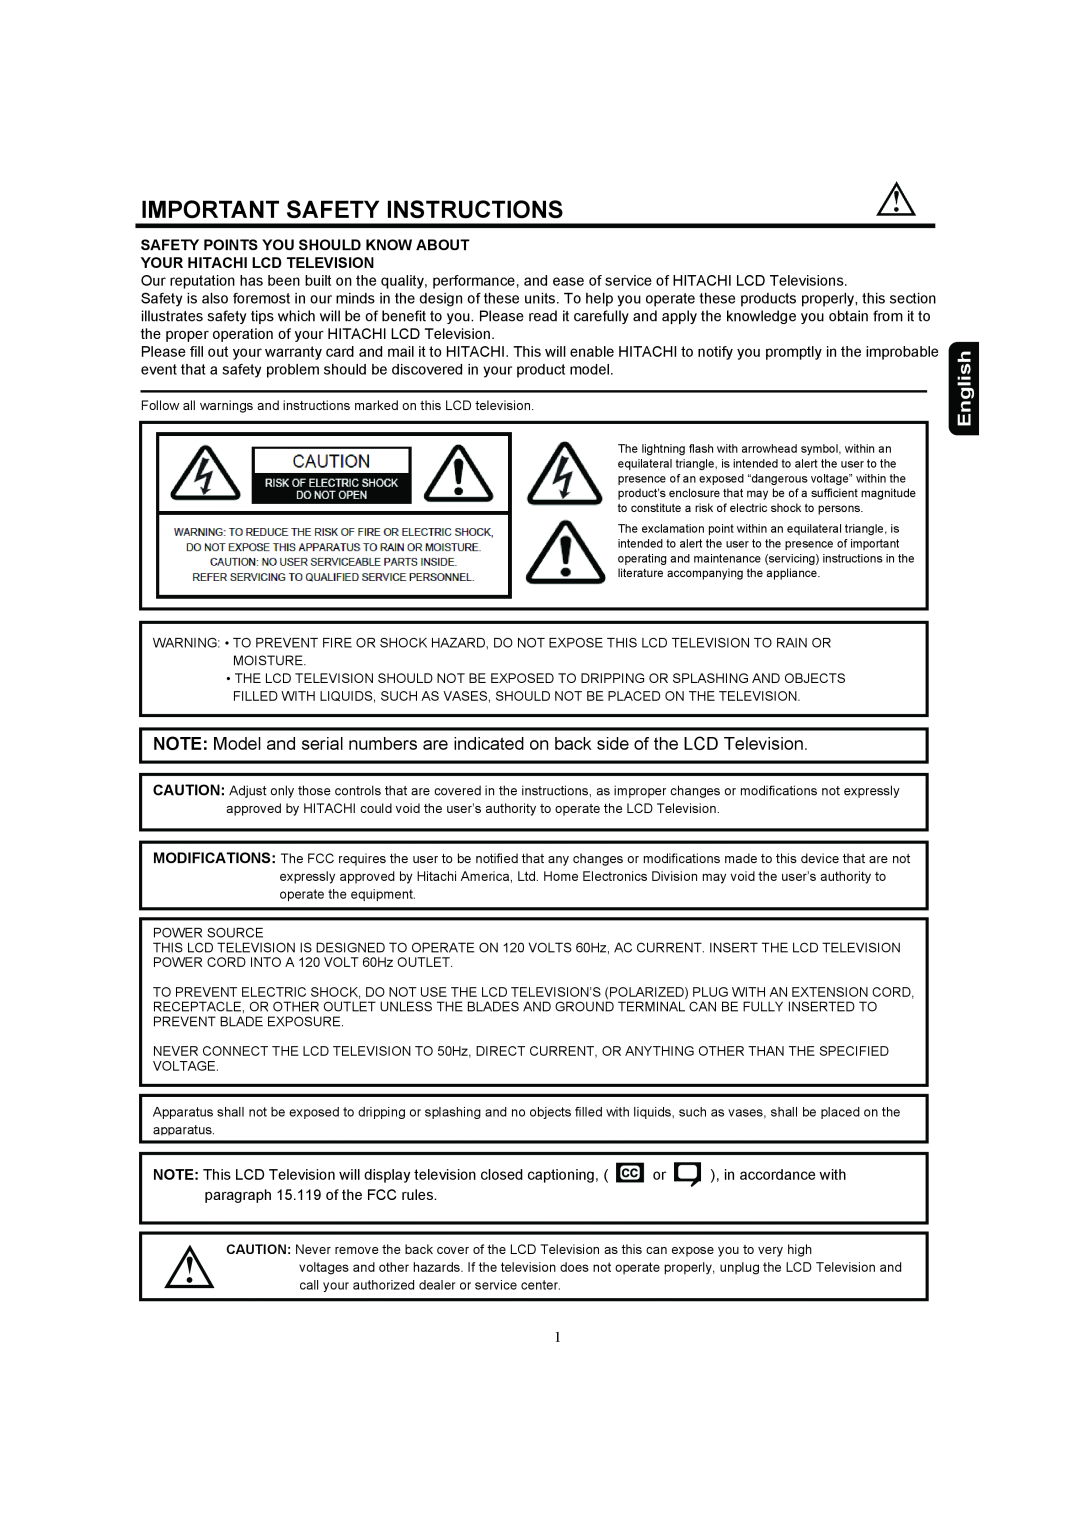 Hitachi 37HDL52A Important Safety Instructions, English, Safety Points You Should Know About Your Hitachi Lcd Television 